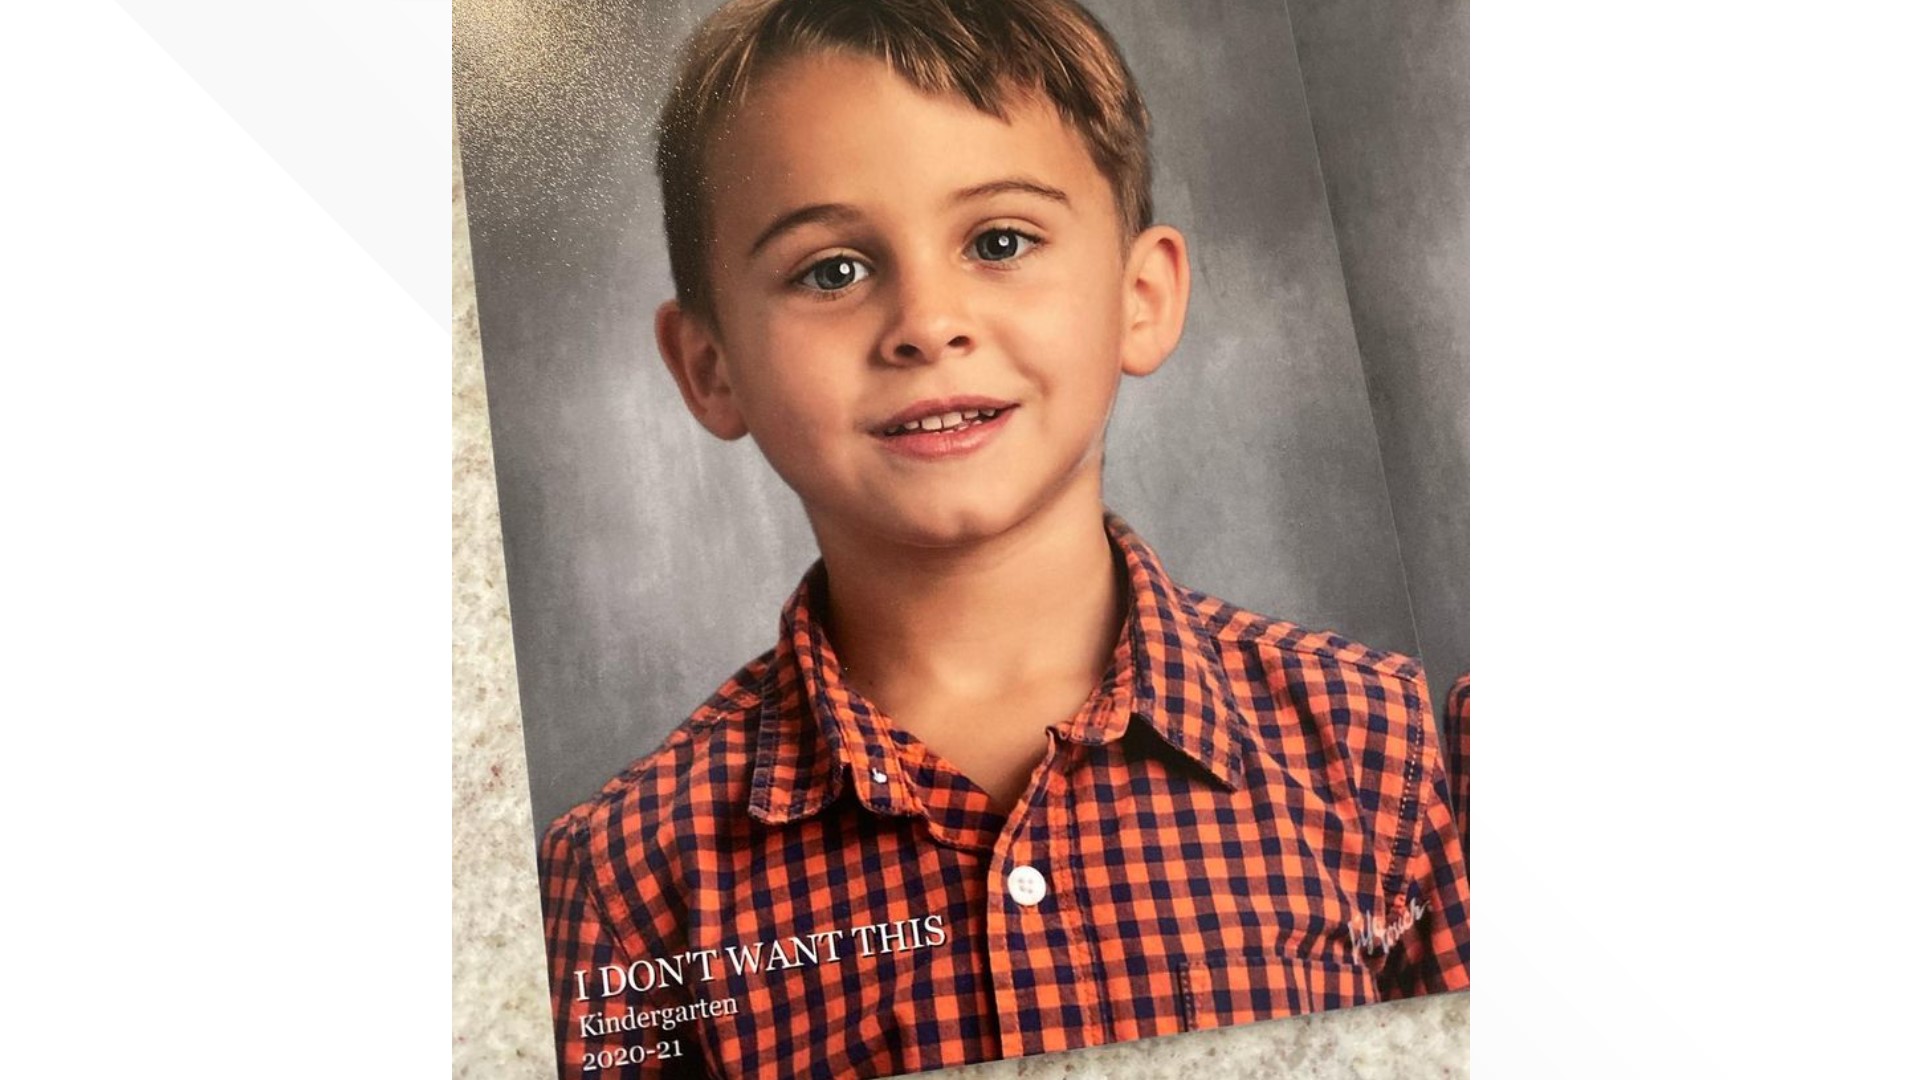 Mason Kinley, 5, now has a school photo his mom says is the family's memory of the year.